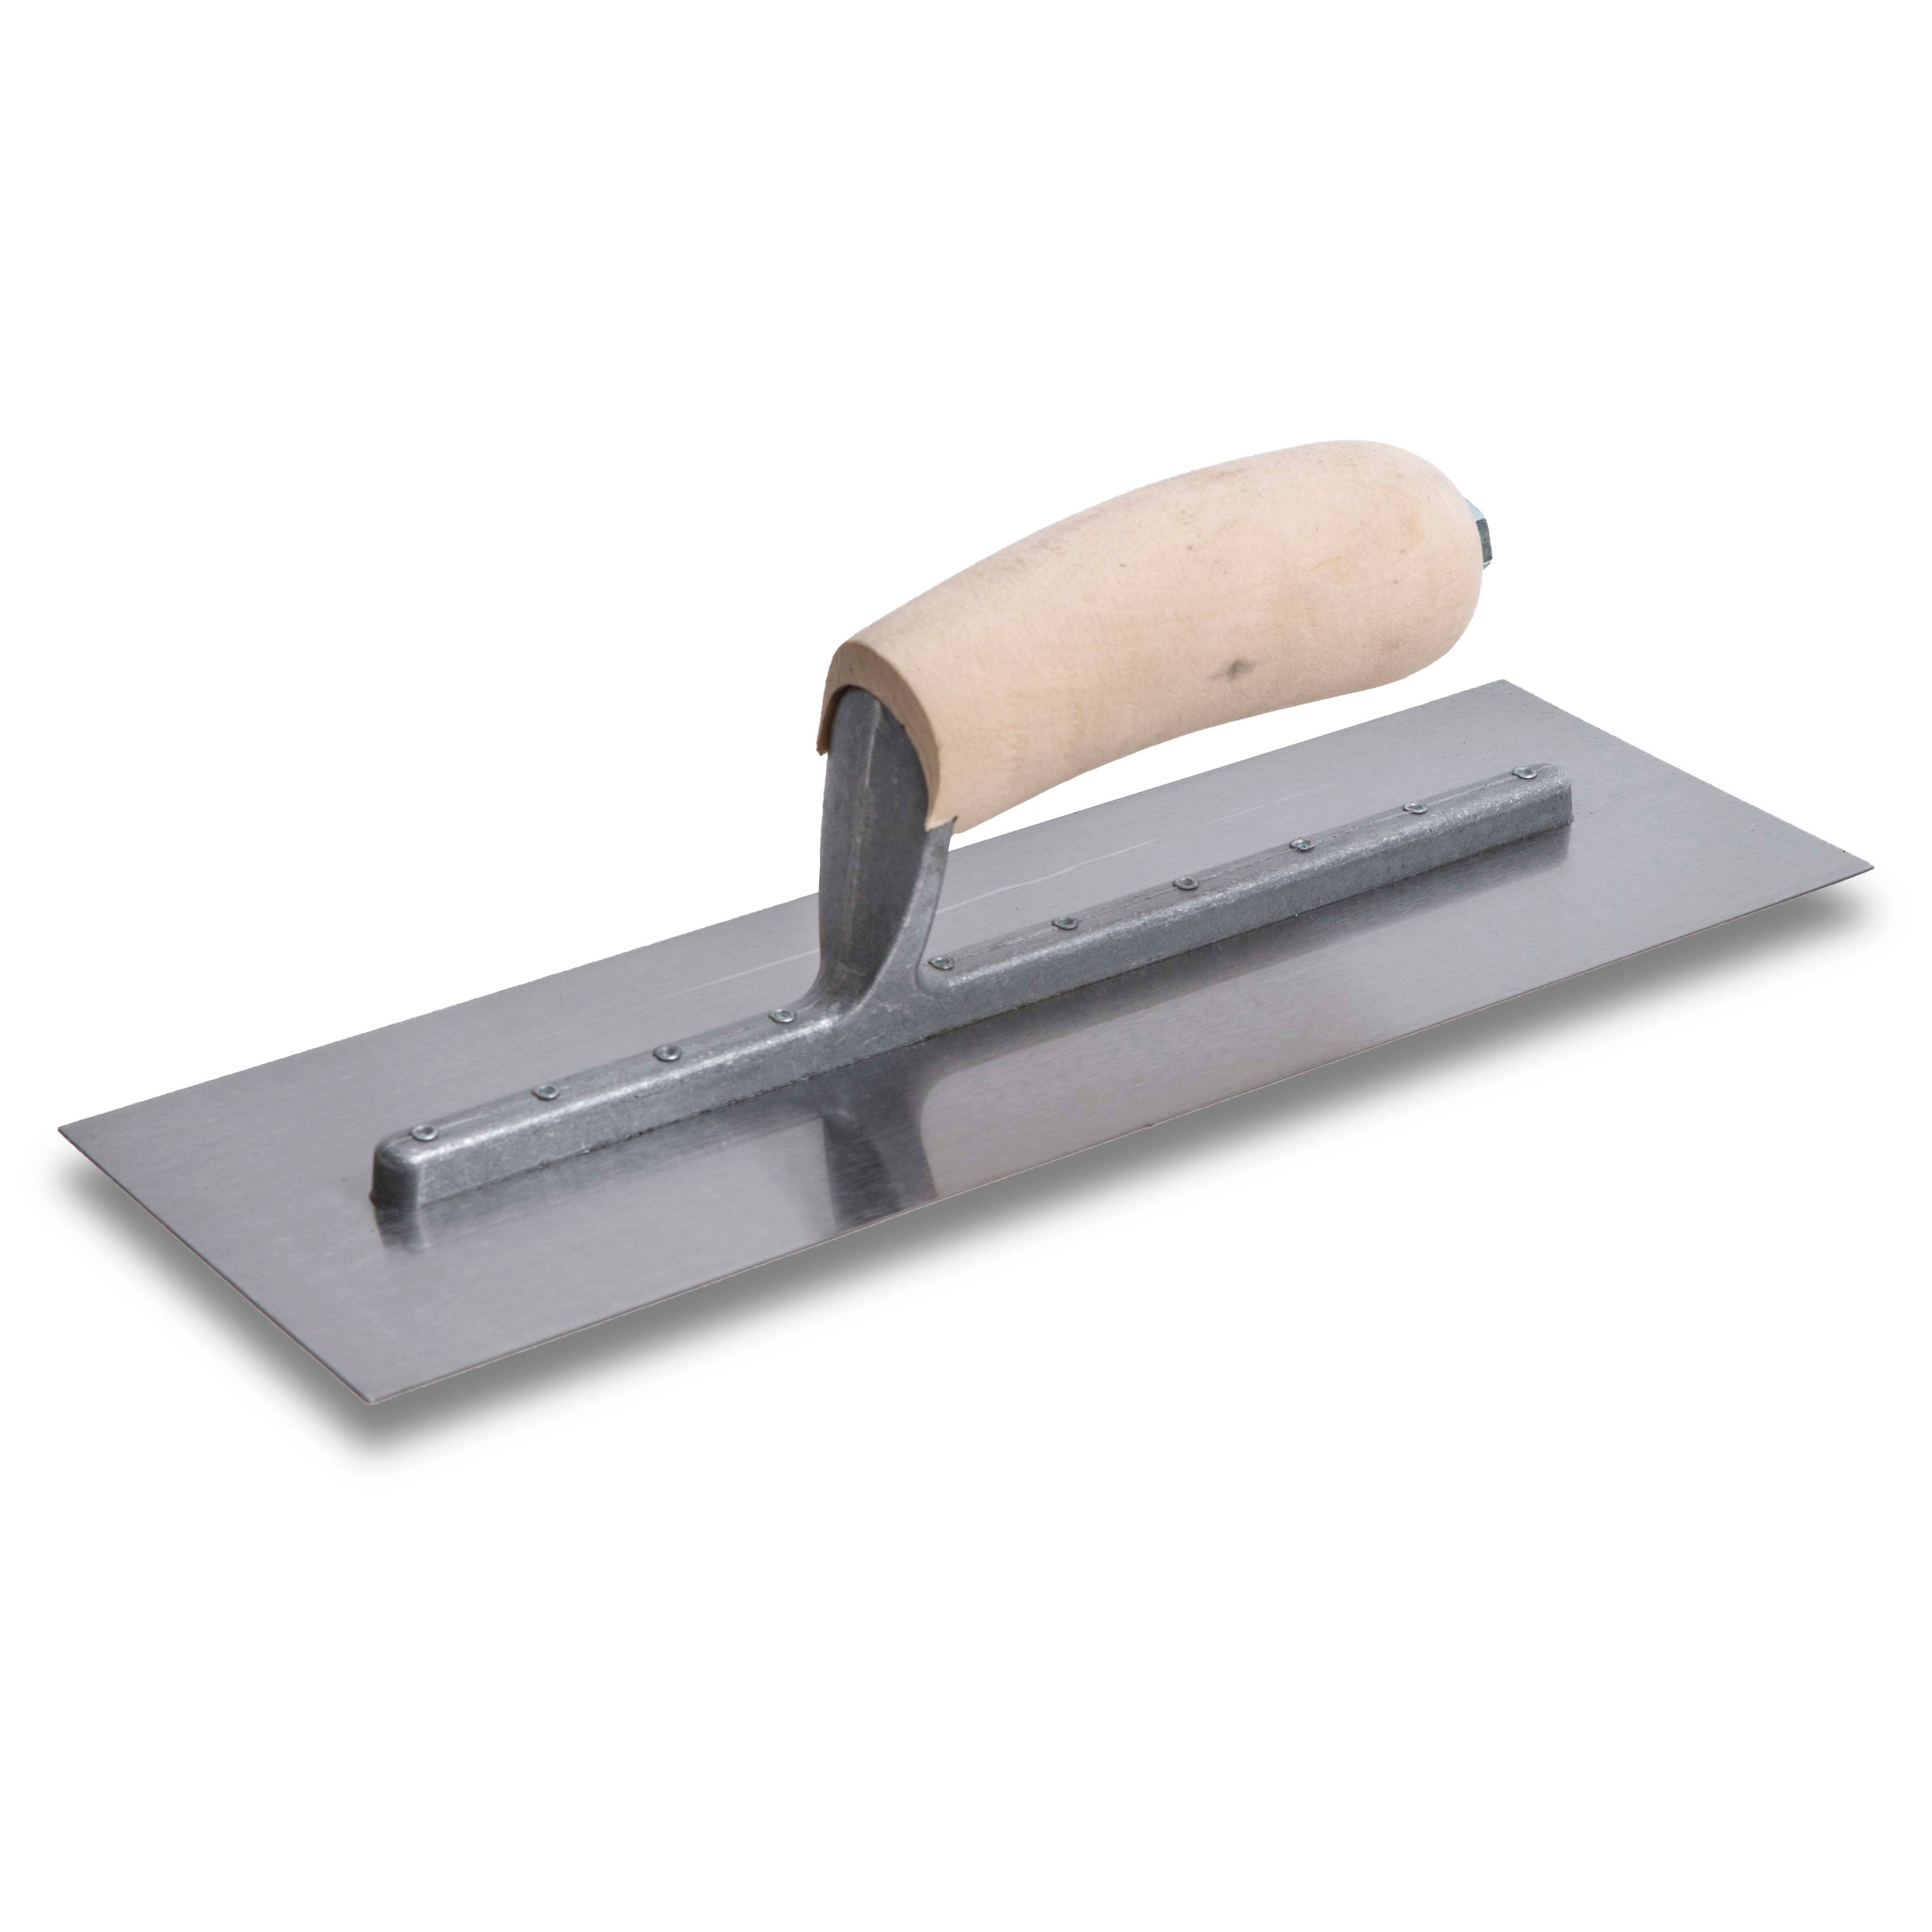 Marshalltown FT362 12in x 4in Finishing Trowel with Curved Wood Handle FT362